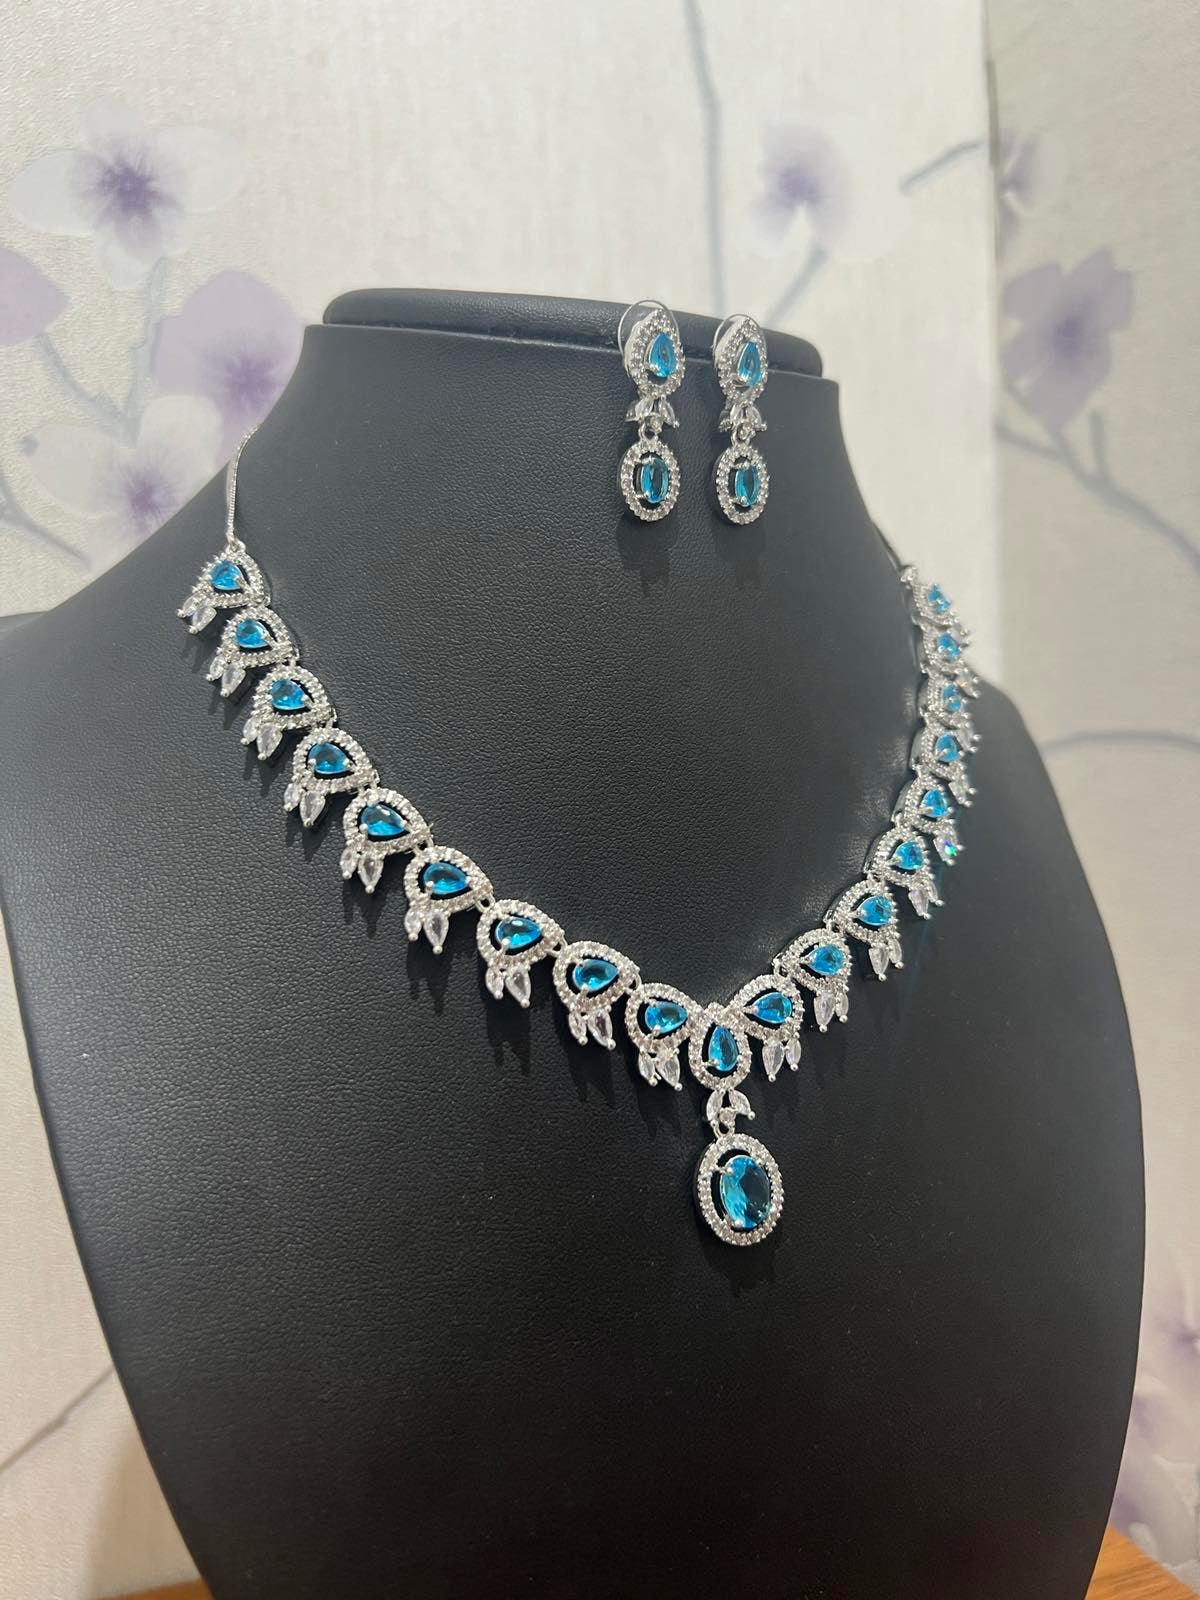 American Diamond Necklace with Sky Blue Stone - Boutique Nepal